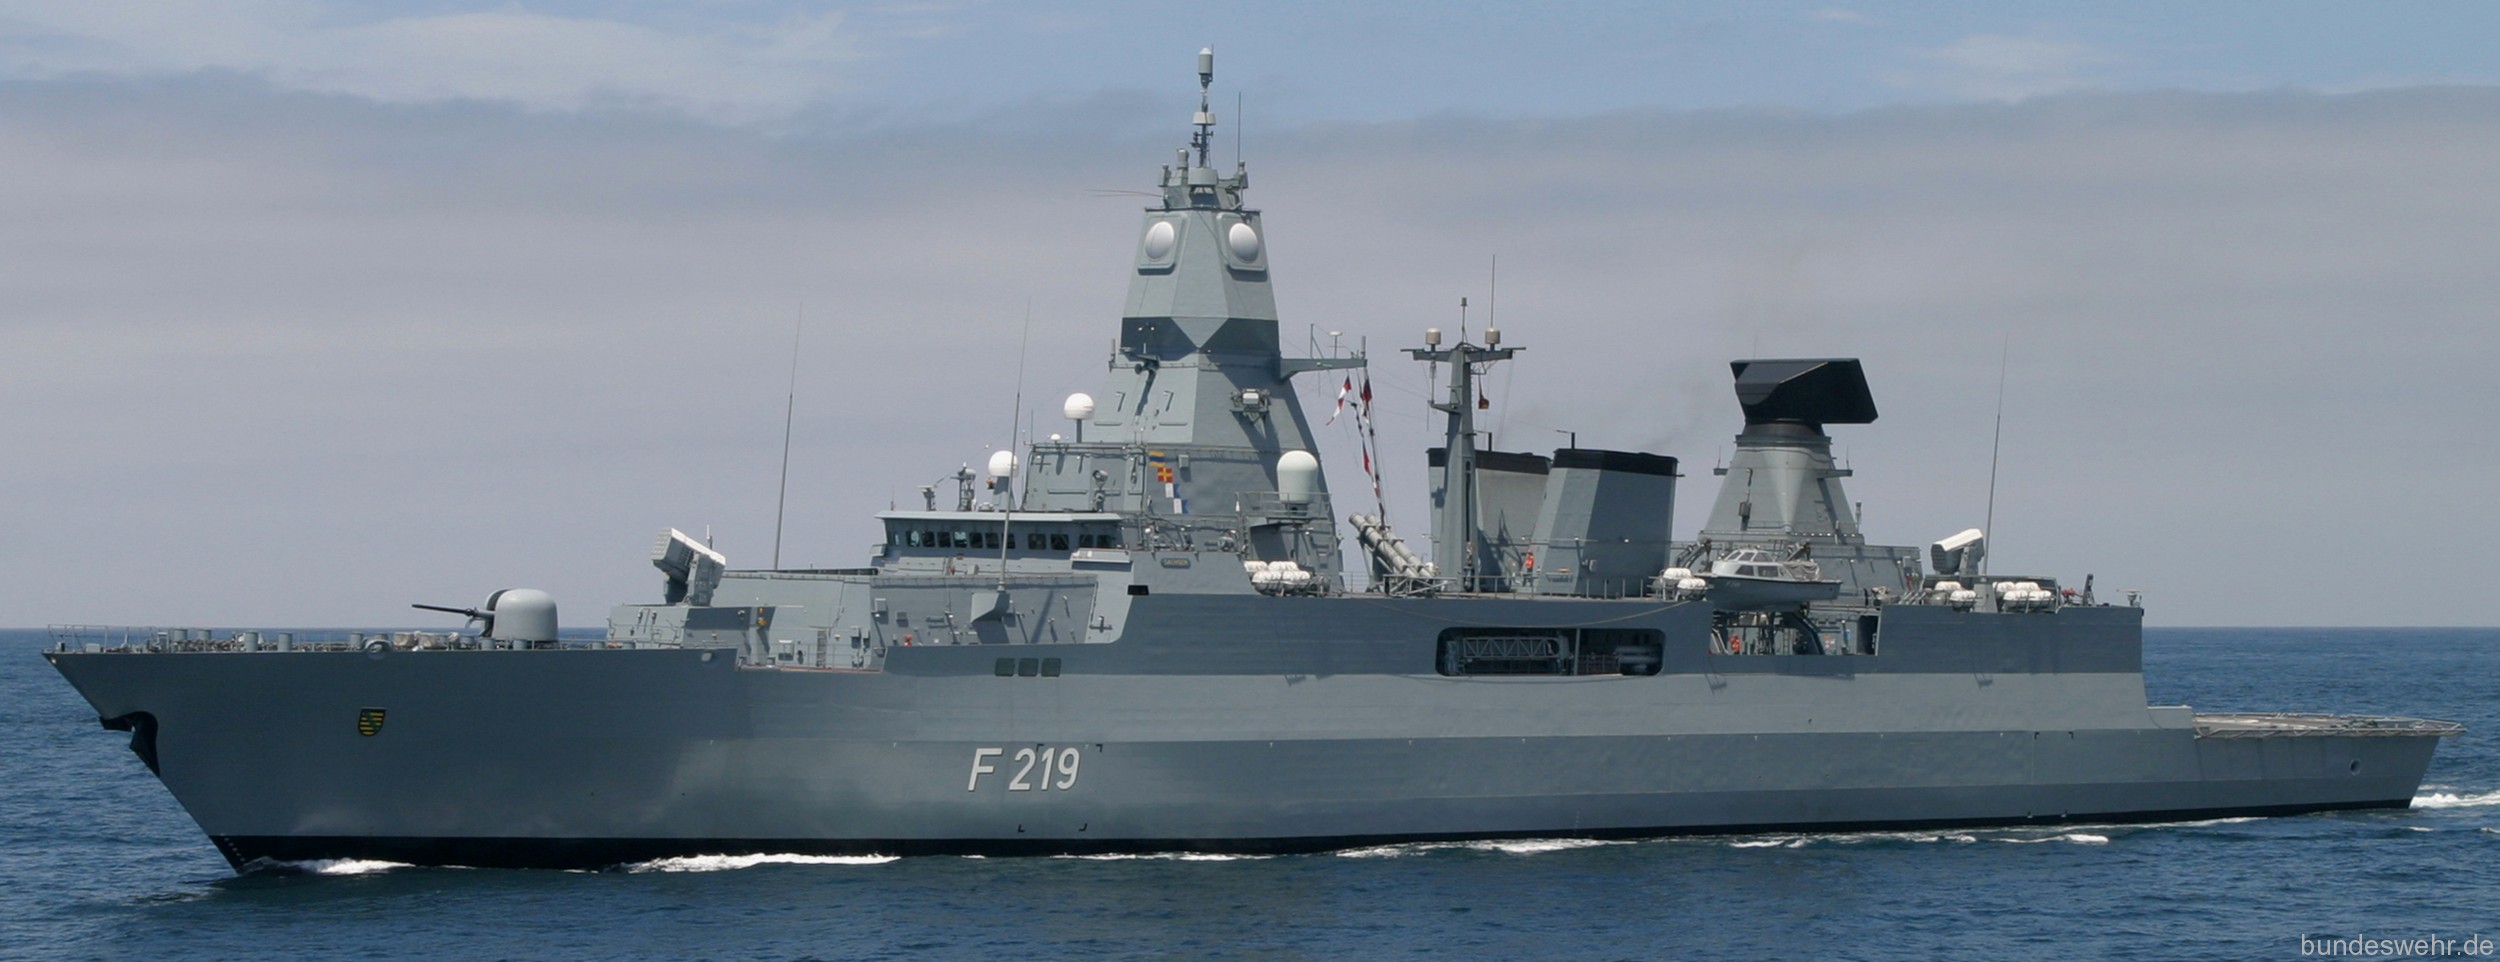 f-219 fgs sachsen type 124 class guided missile frigate ffg german navy 26